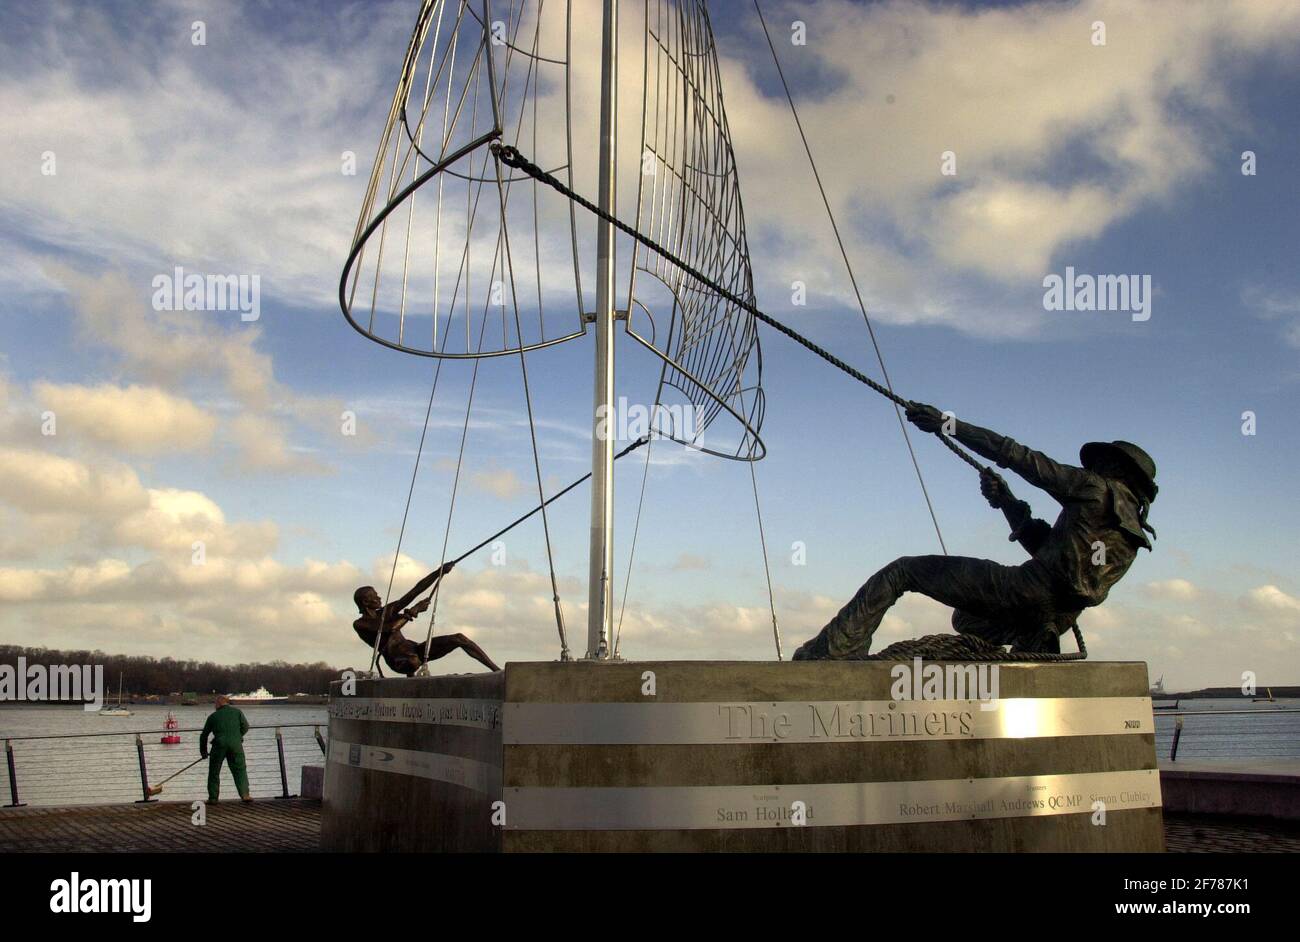 the marinerssculpture at chatham. 30/11/00 pilston. Stock Photo